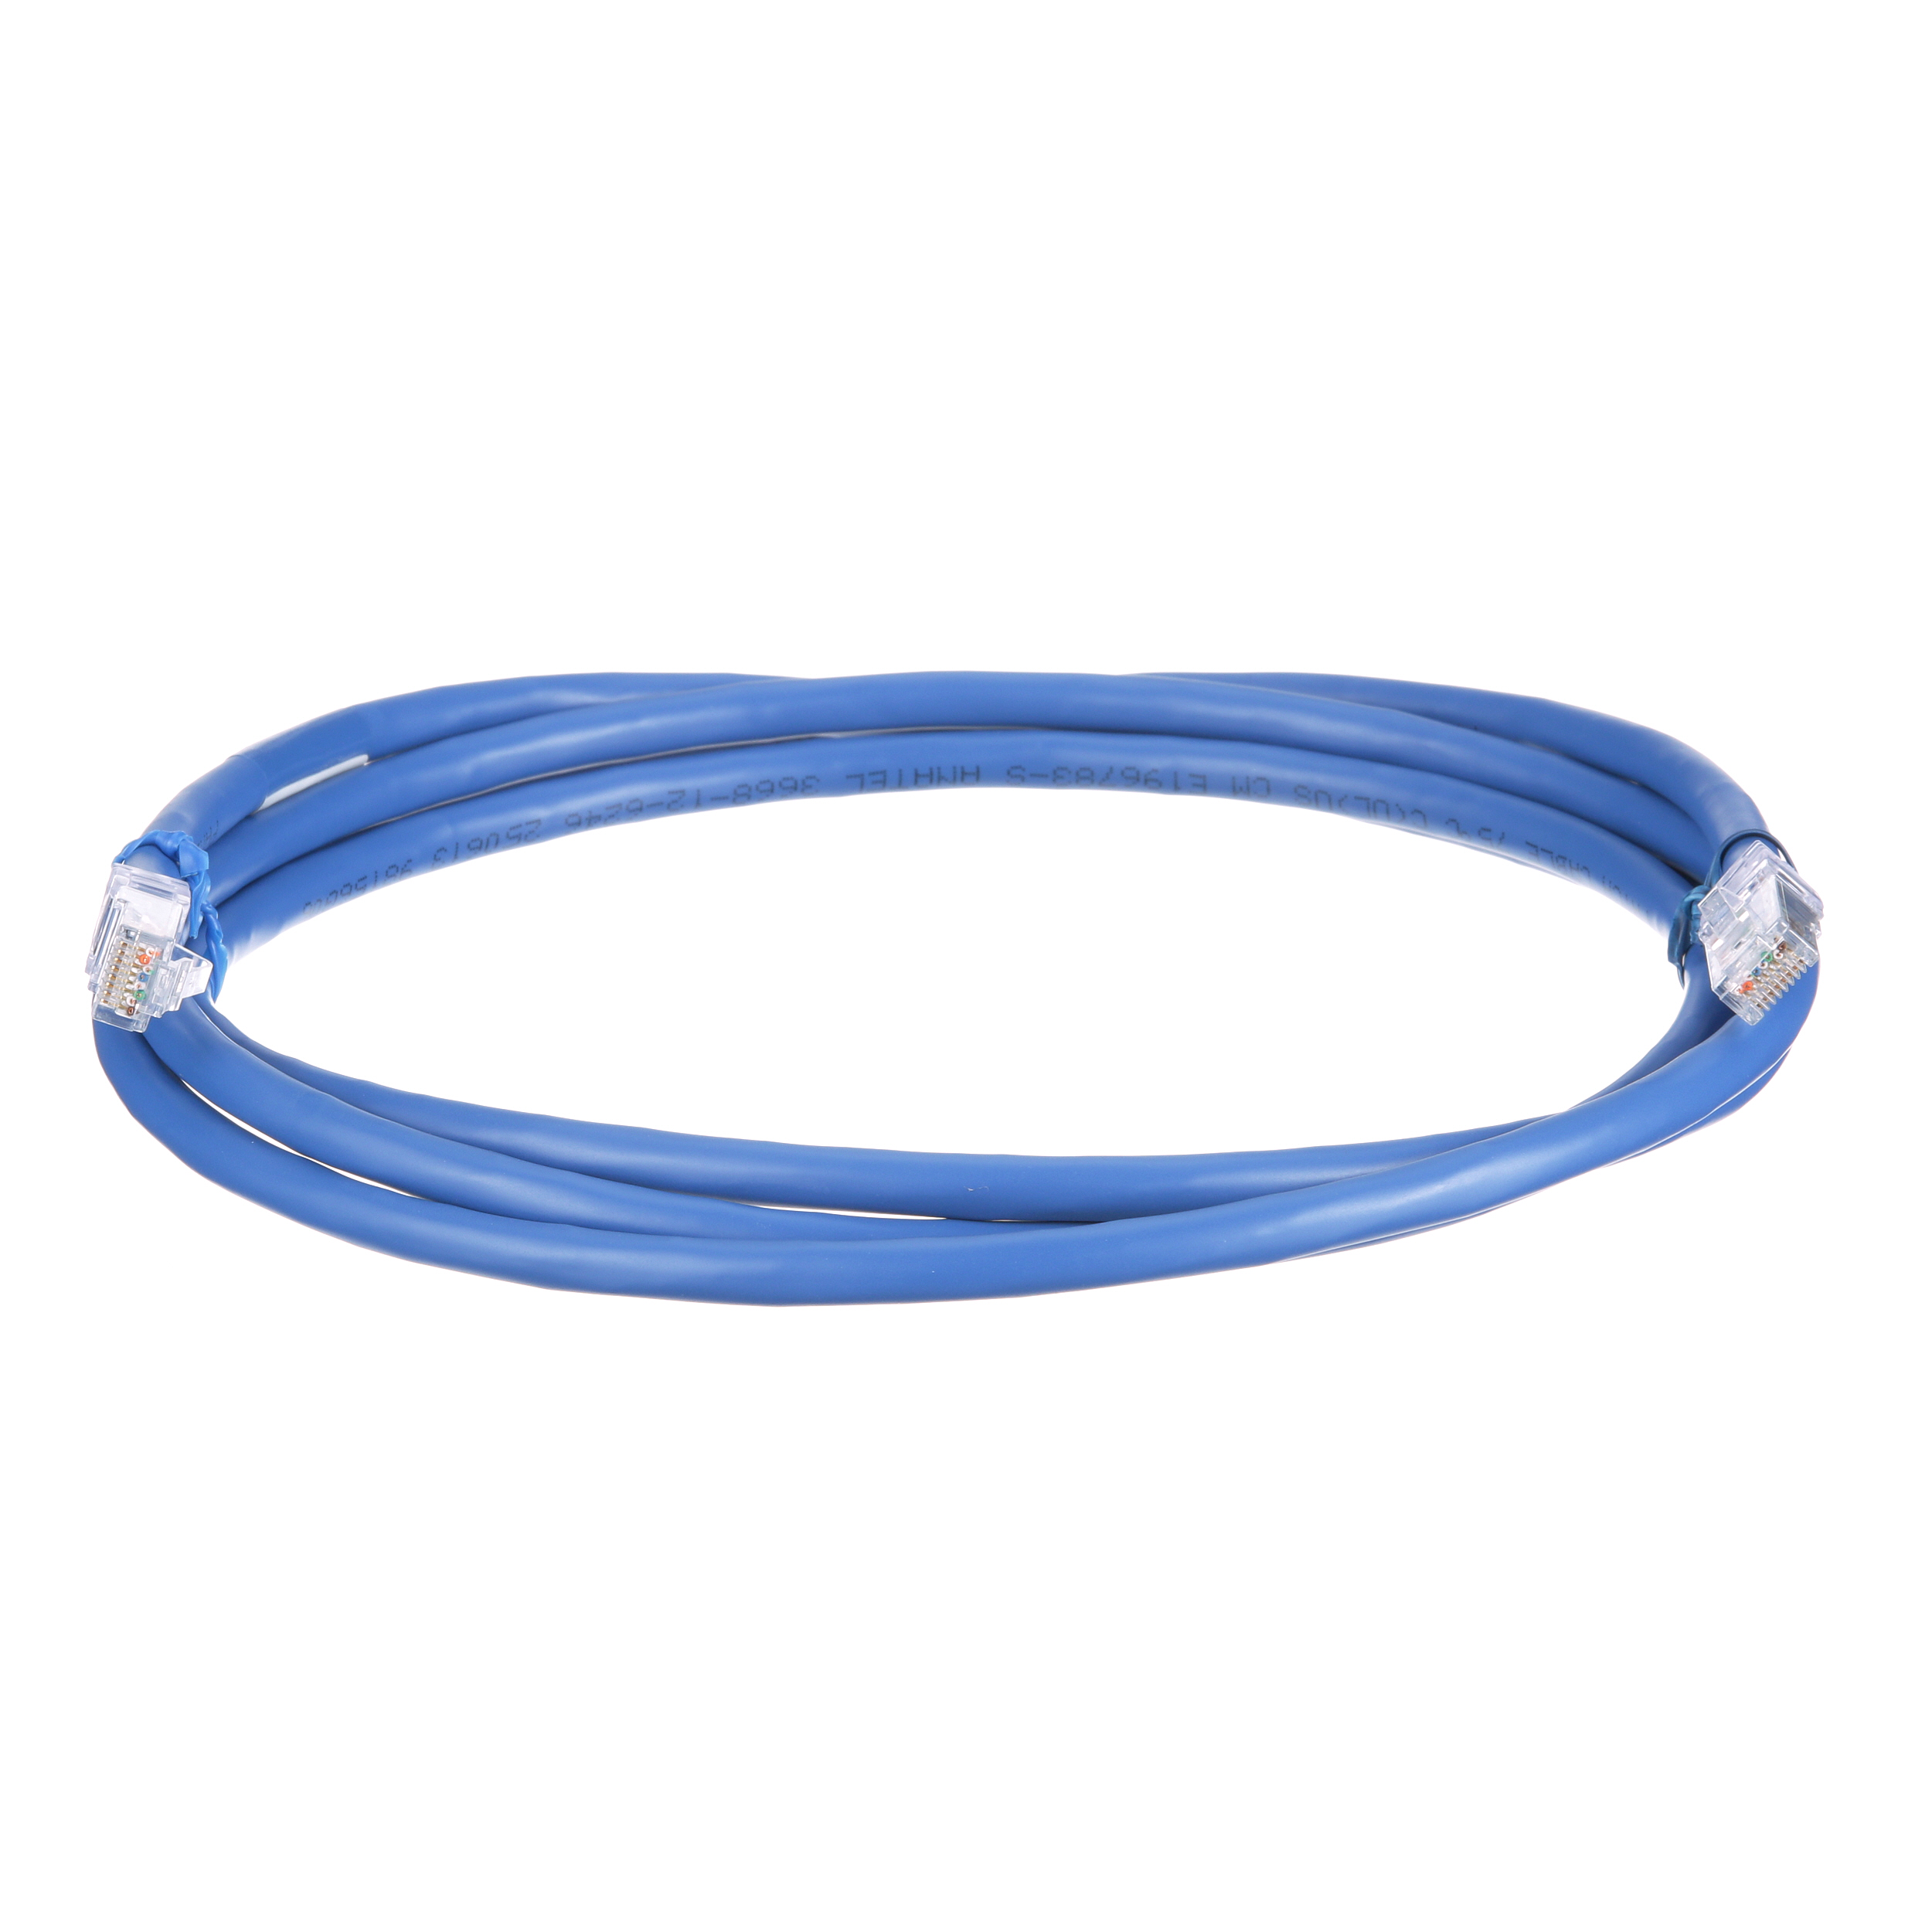 Patch cord, 24 AWG, Cat. 6A, RJ45, 6M, Blue